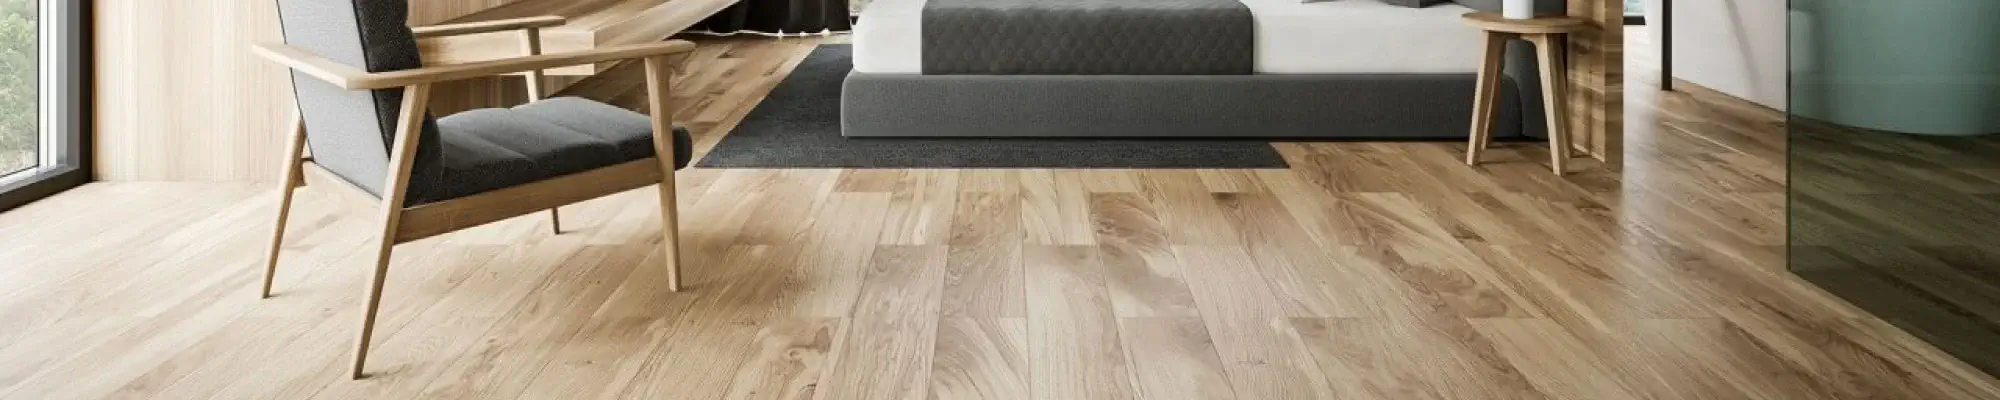 Learn about the COREtec flooring supplies at Central Floor Supply in Fresco, CA